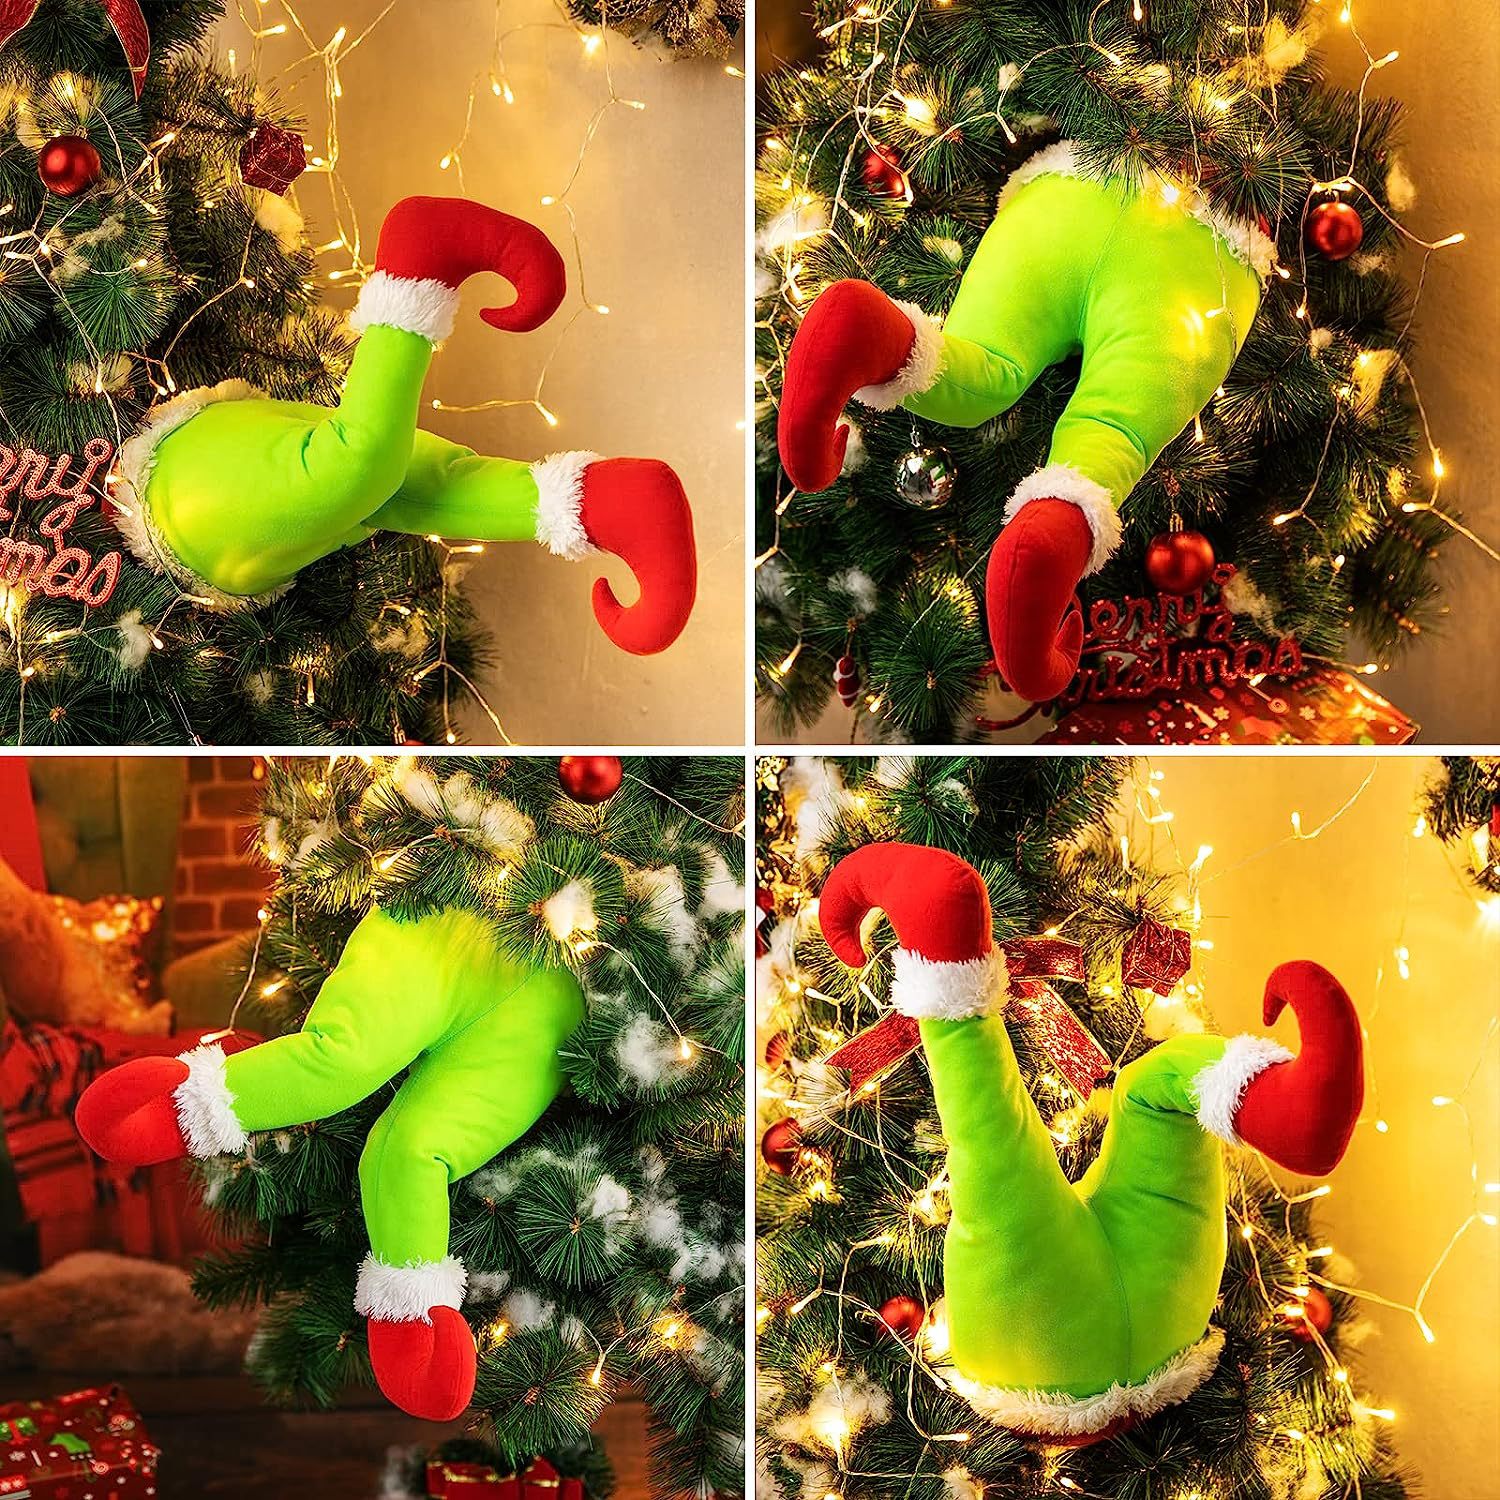 Christmas Holiday Decoration - Grinch Green Artificial Leg Tree Decor with Santa Claus and Elf Leg Ornaments